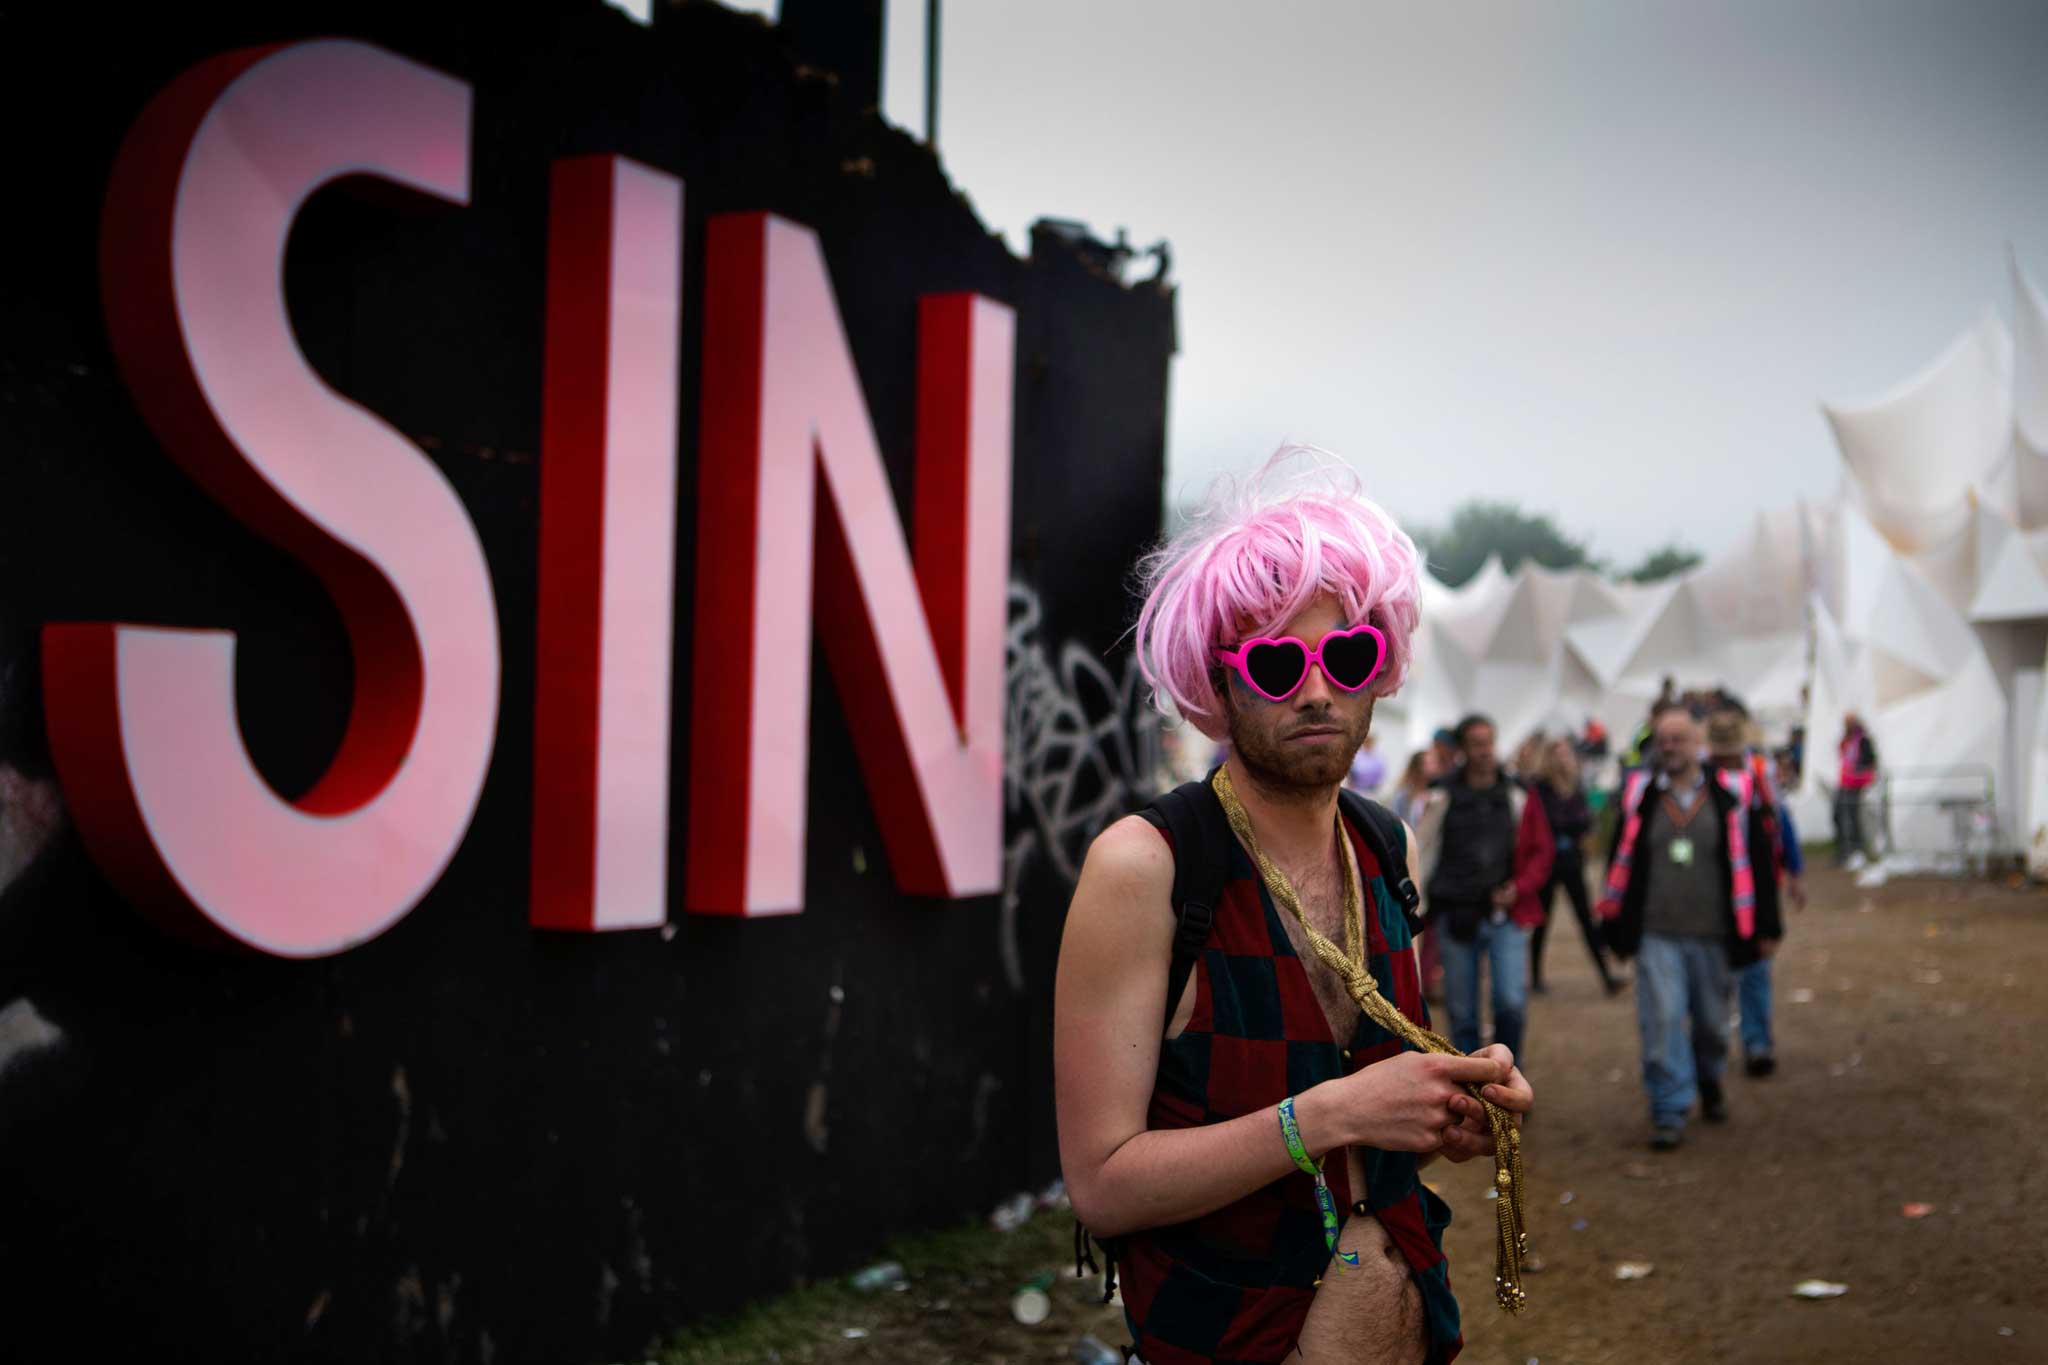 Hedonistic hideout: Shangri-La is the destination for serious partygoers once the final bow has been taken on the Pyramid Stage